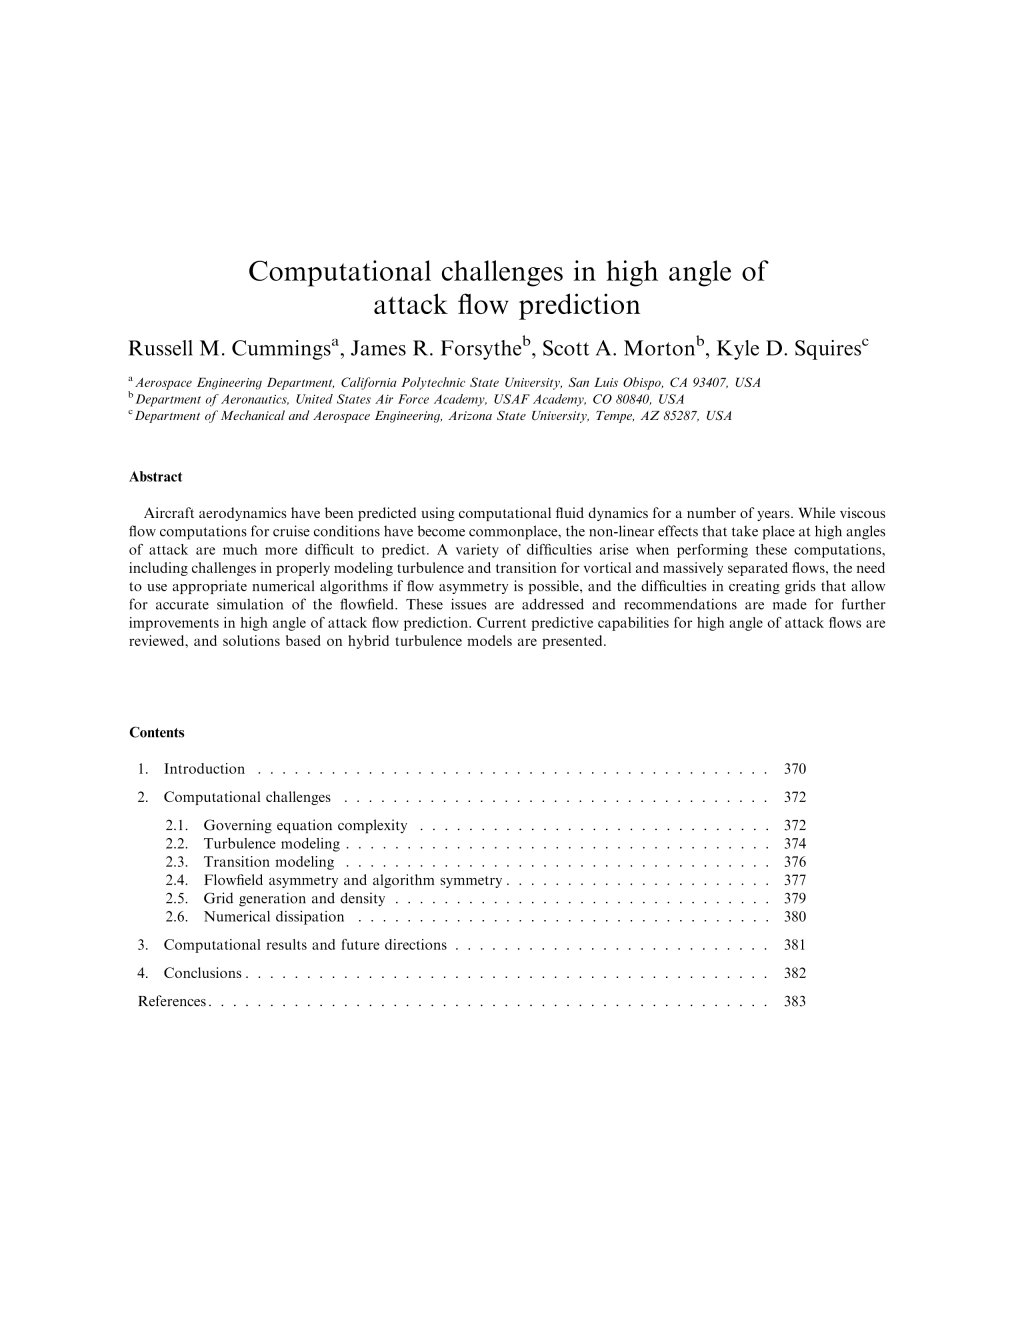 Computational Challenges in High Angle of Attack Flow Prediction